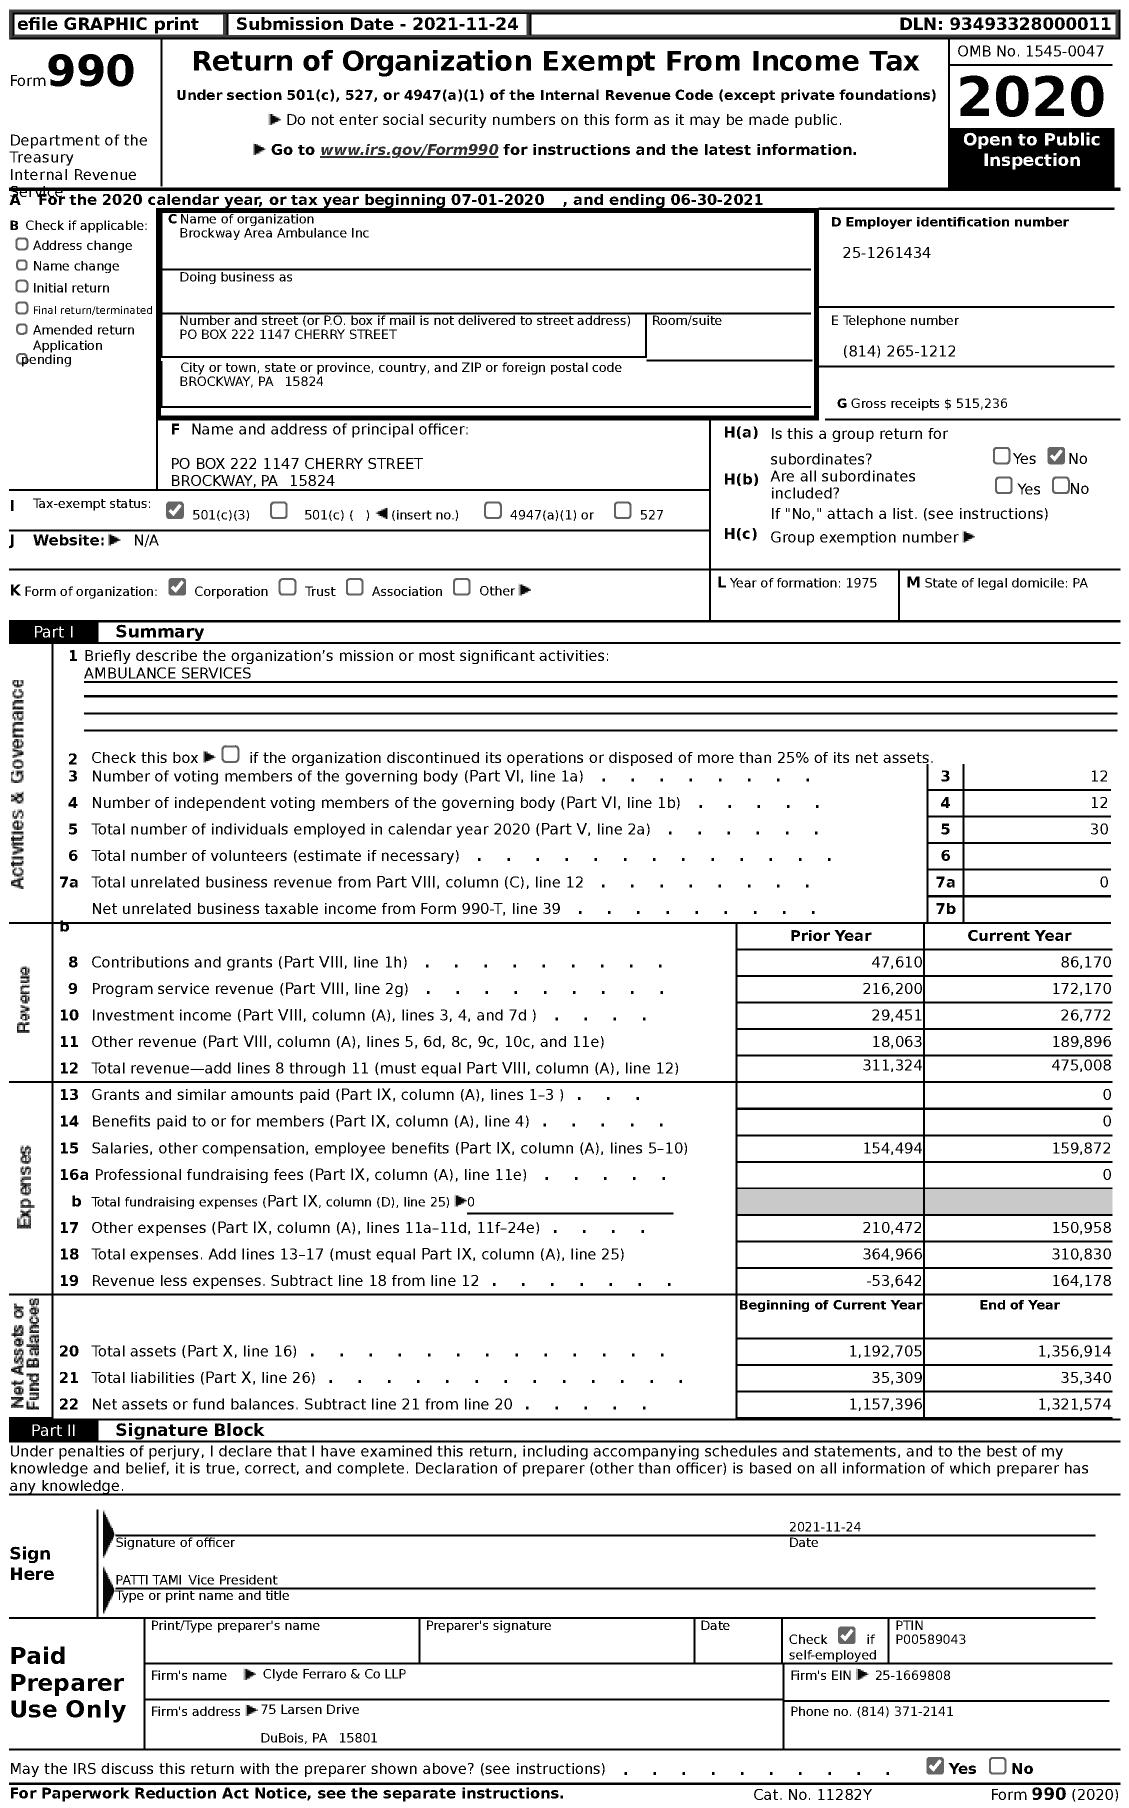 Image of first page of 2020 Form 990 for Brockway Area Ambulance